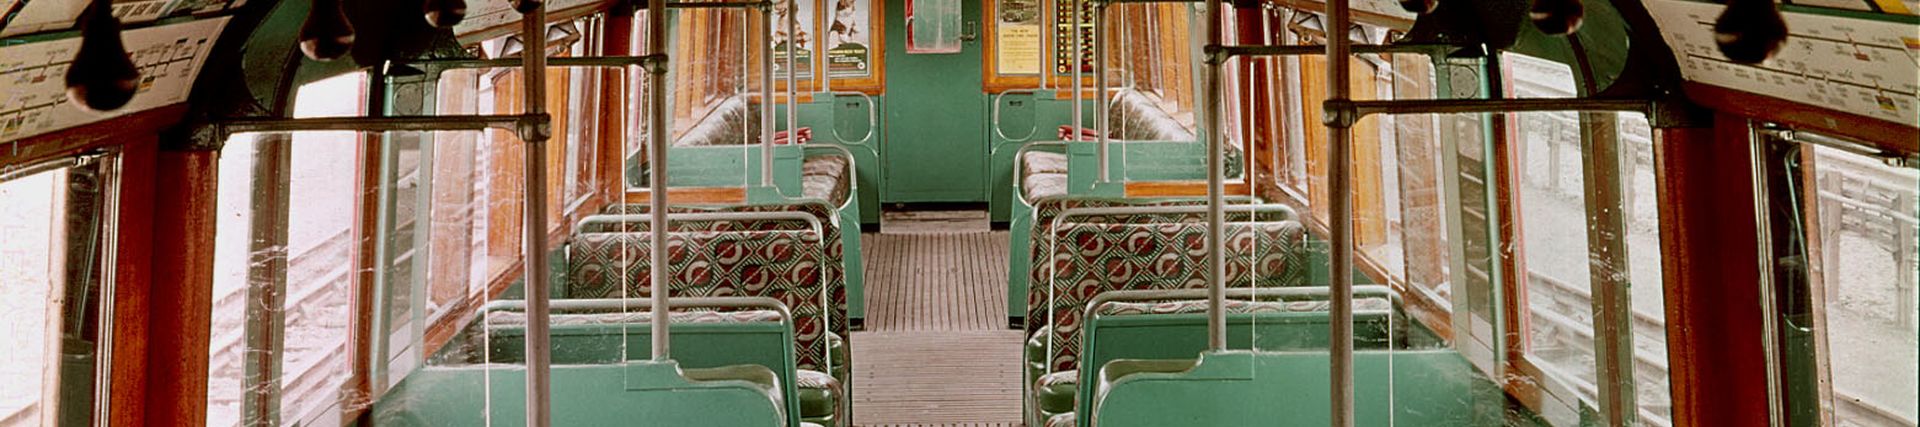 1938 tube stock carriage interior. The carriage is empty with not people. Either side of the aisle in the centre of the carriage are moquette seats in a green fabric.